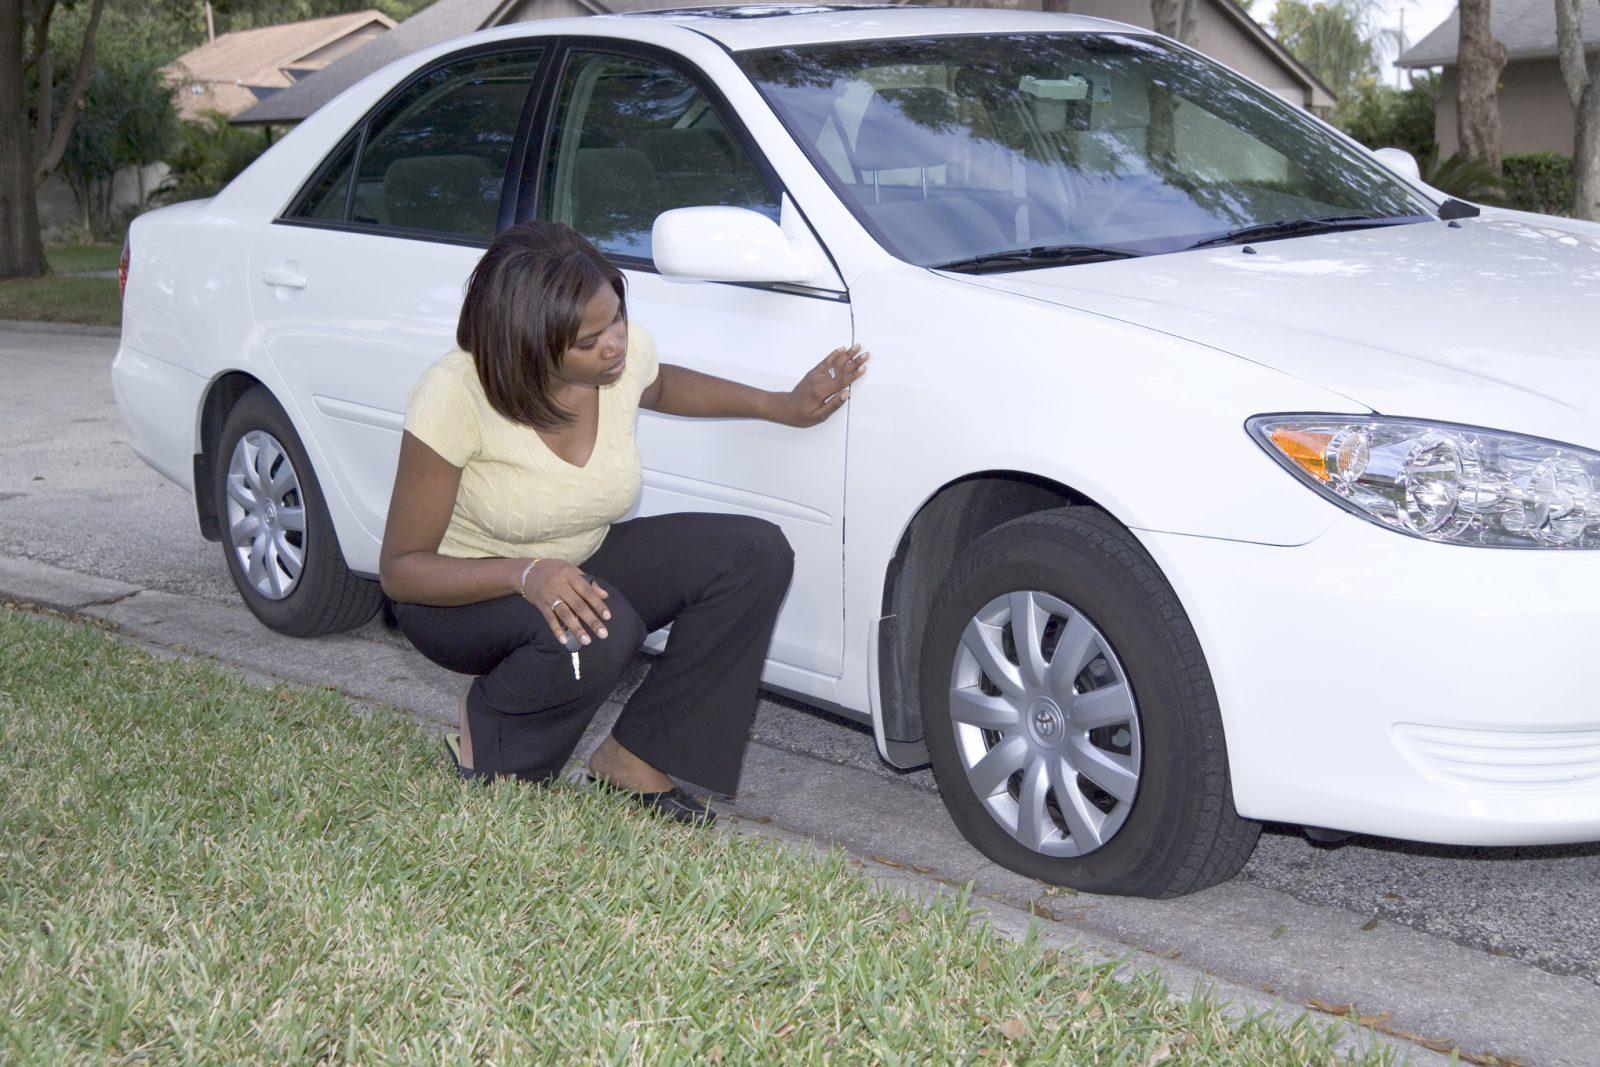 how far can you drive on a flat tire?